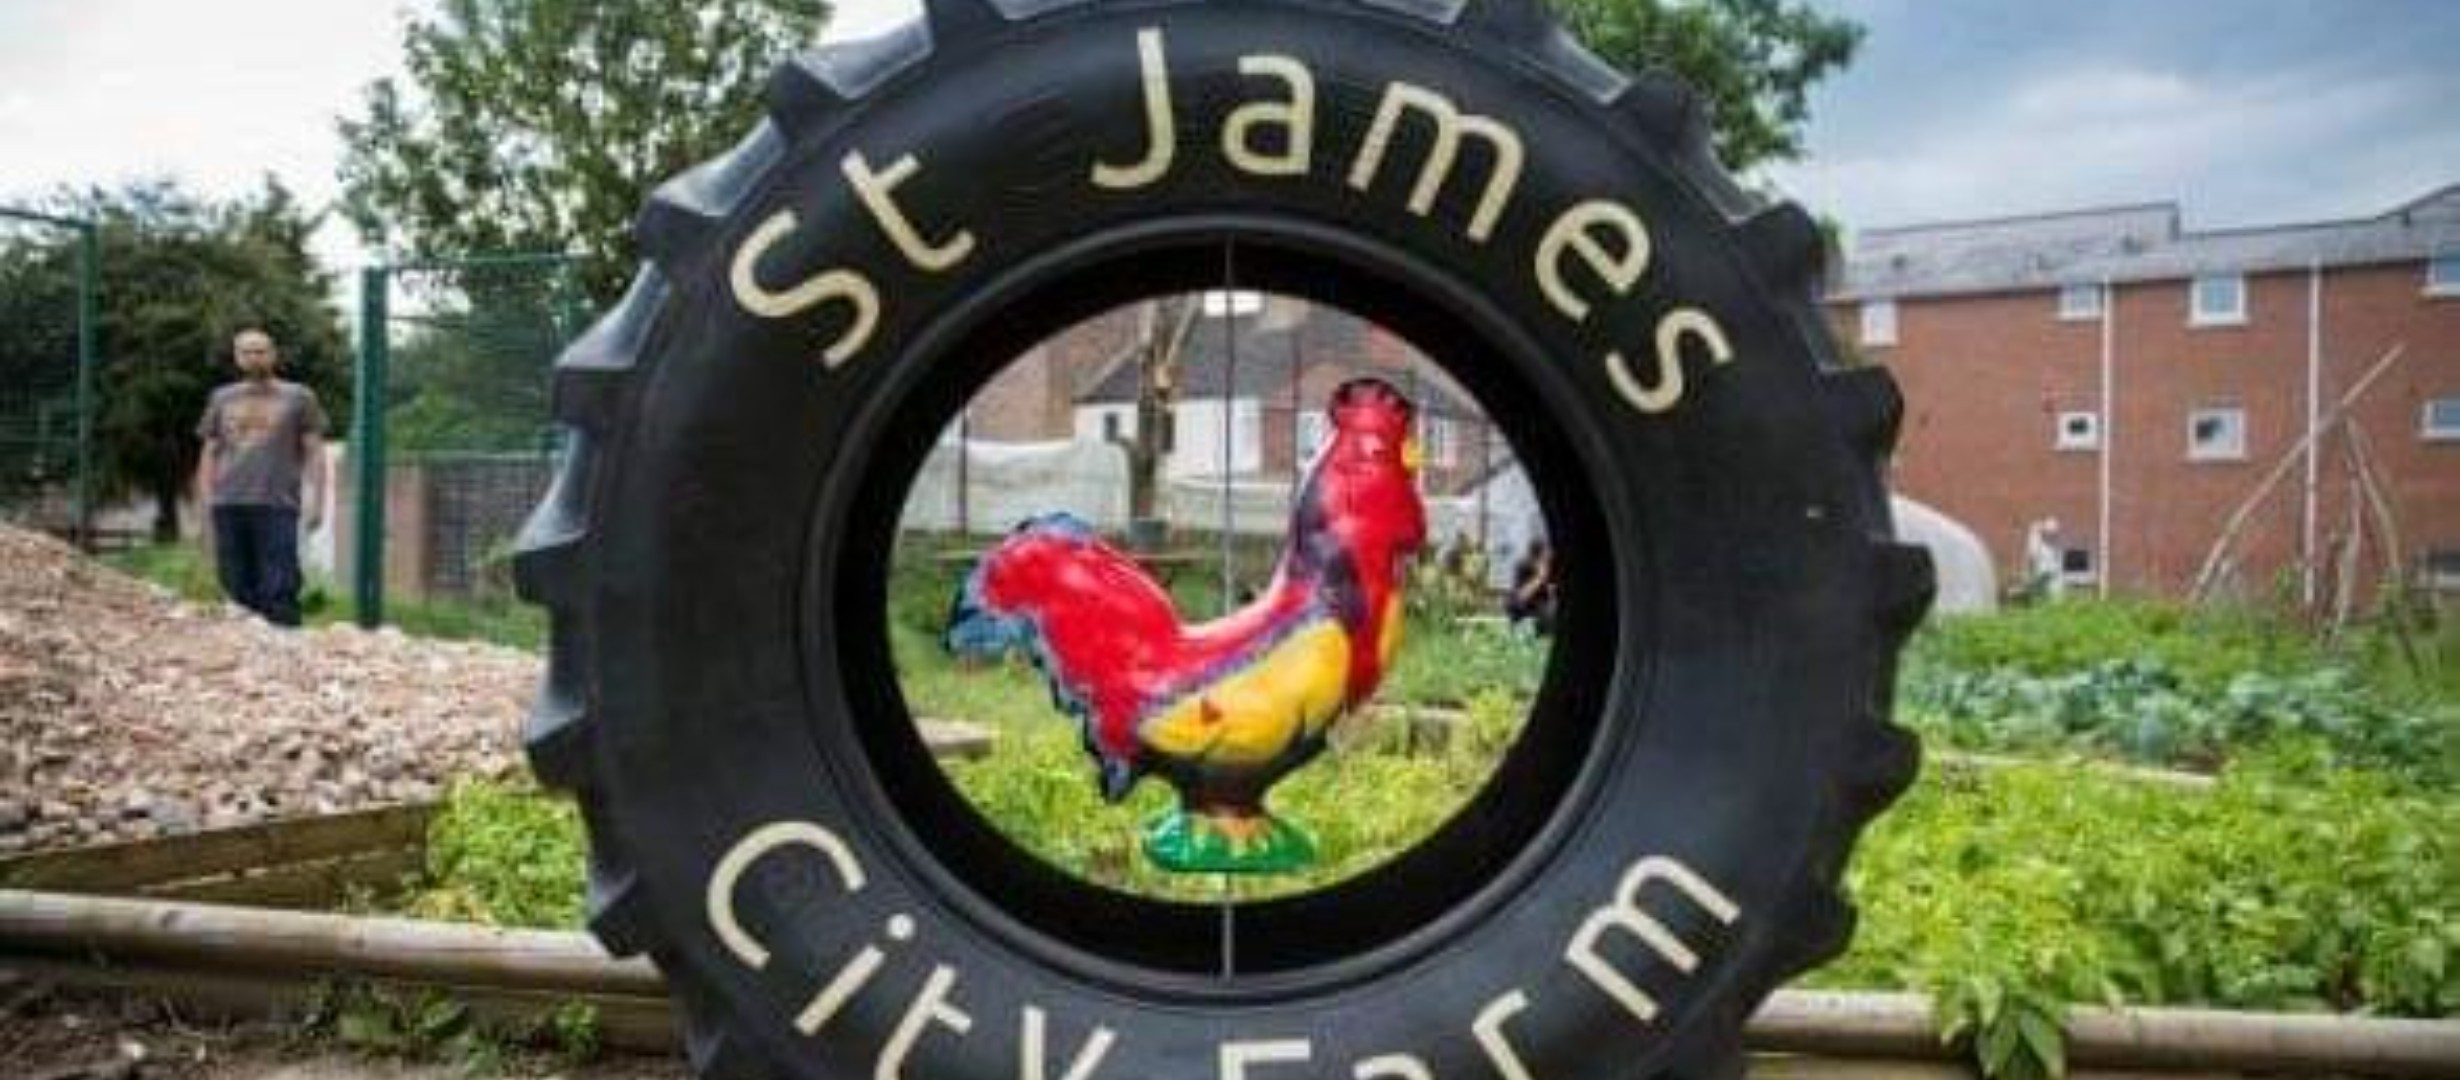 an image of a Red Rooster ornament, perched within an old tractor tire in a green space